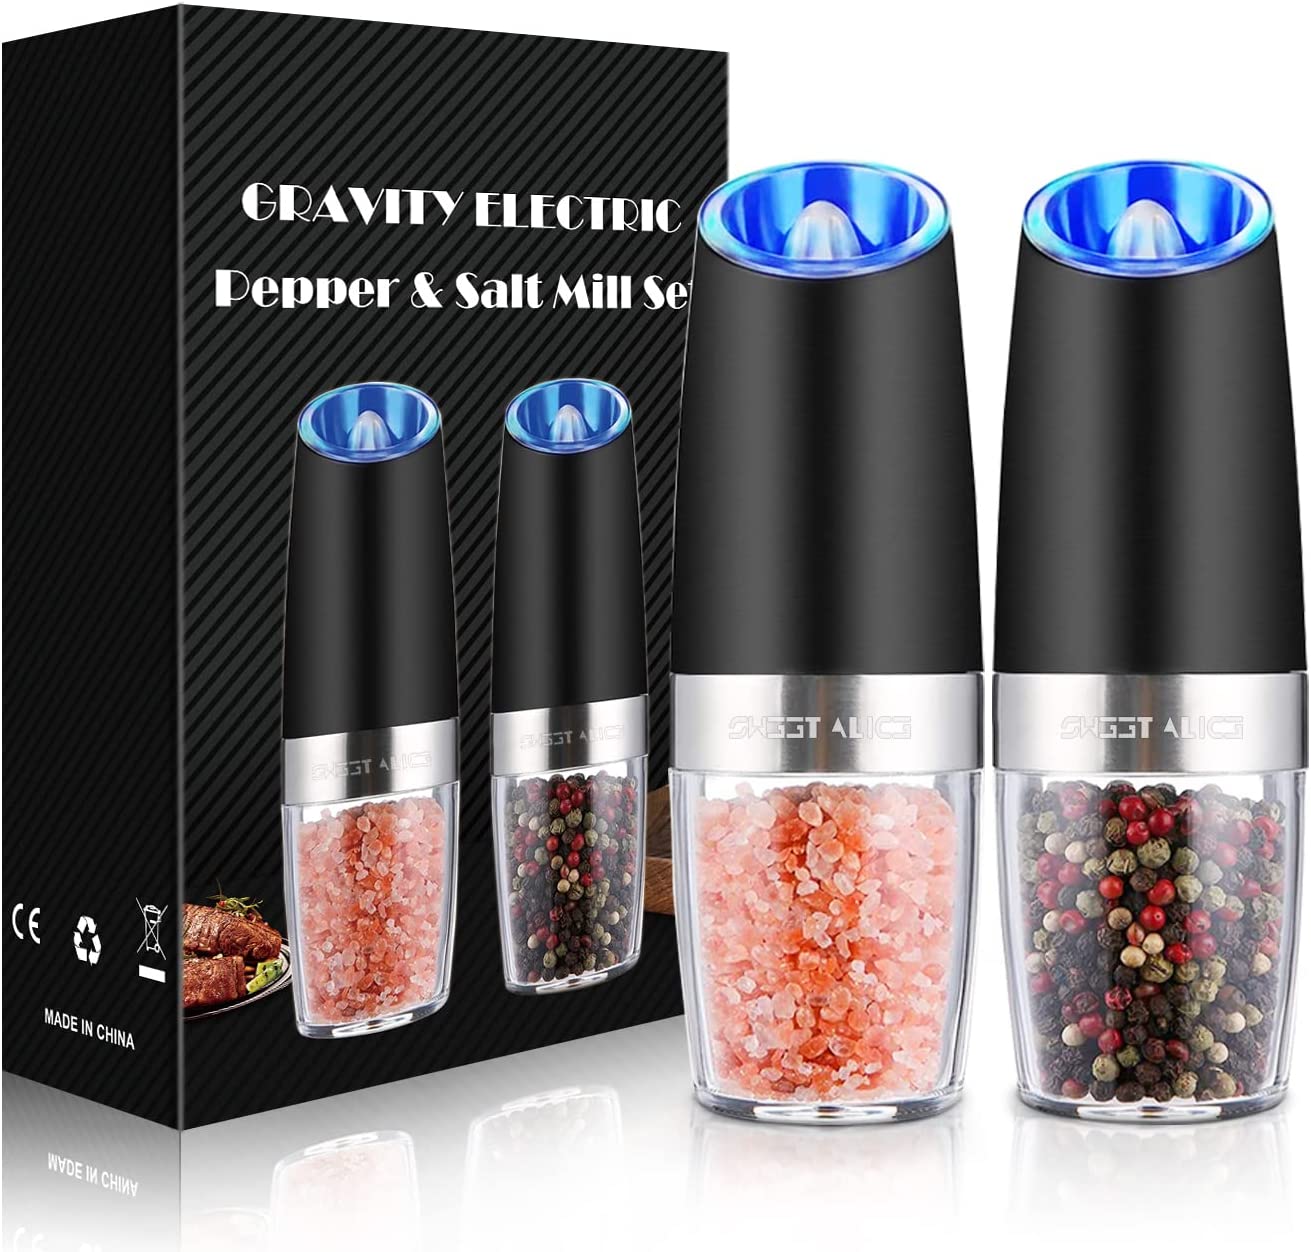 Gravity Electric Pepper and Salt Grinder Set, Adjustable Coarseness, Battery Powered with LED Light, One Hand Automatic Operation, Stainless Steel…